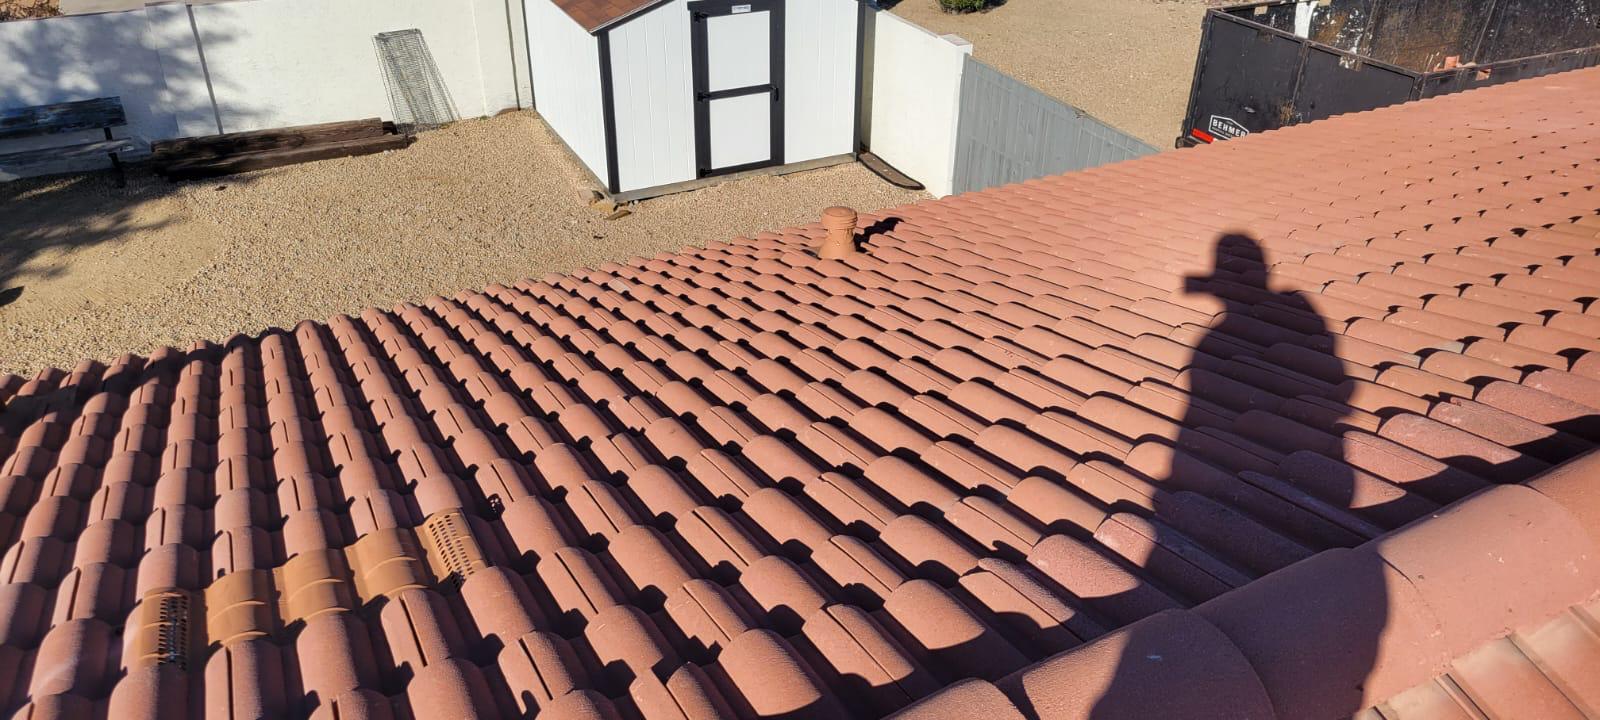 Close-up view of roofing tiles, highlighting their texture and quality, in preparation for a roof replacement in Tempe